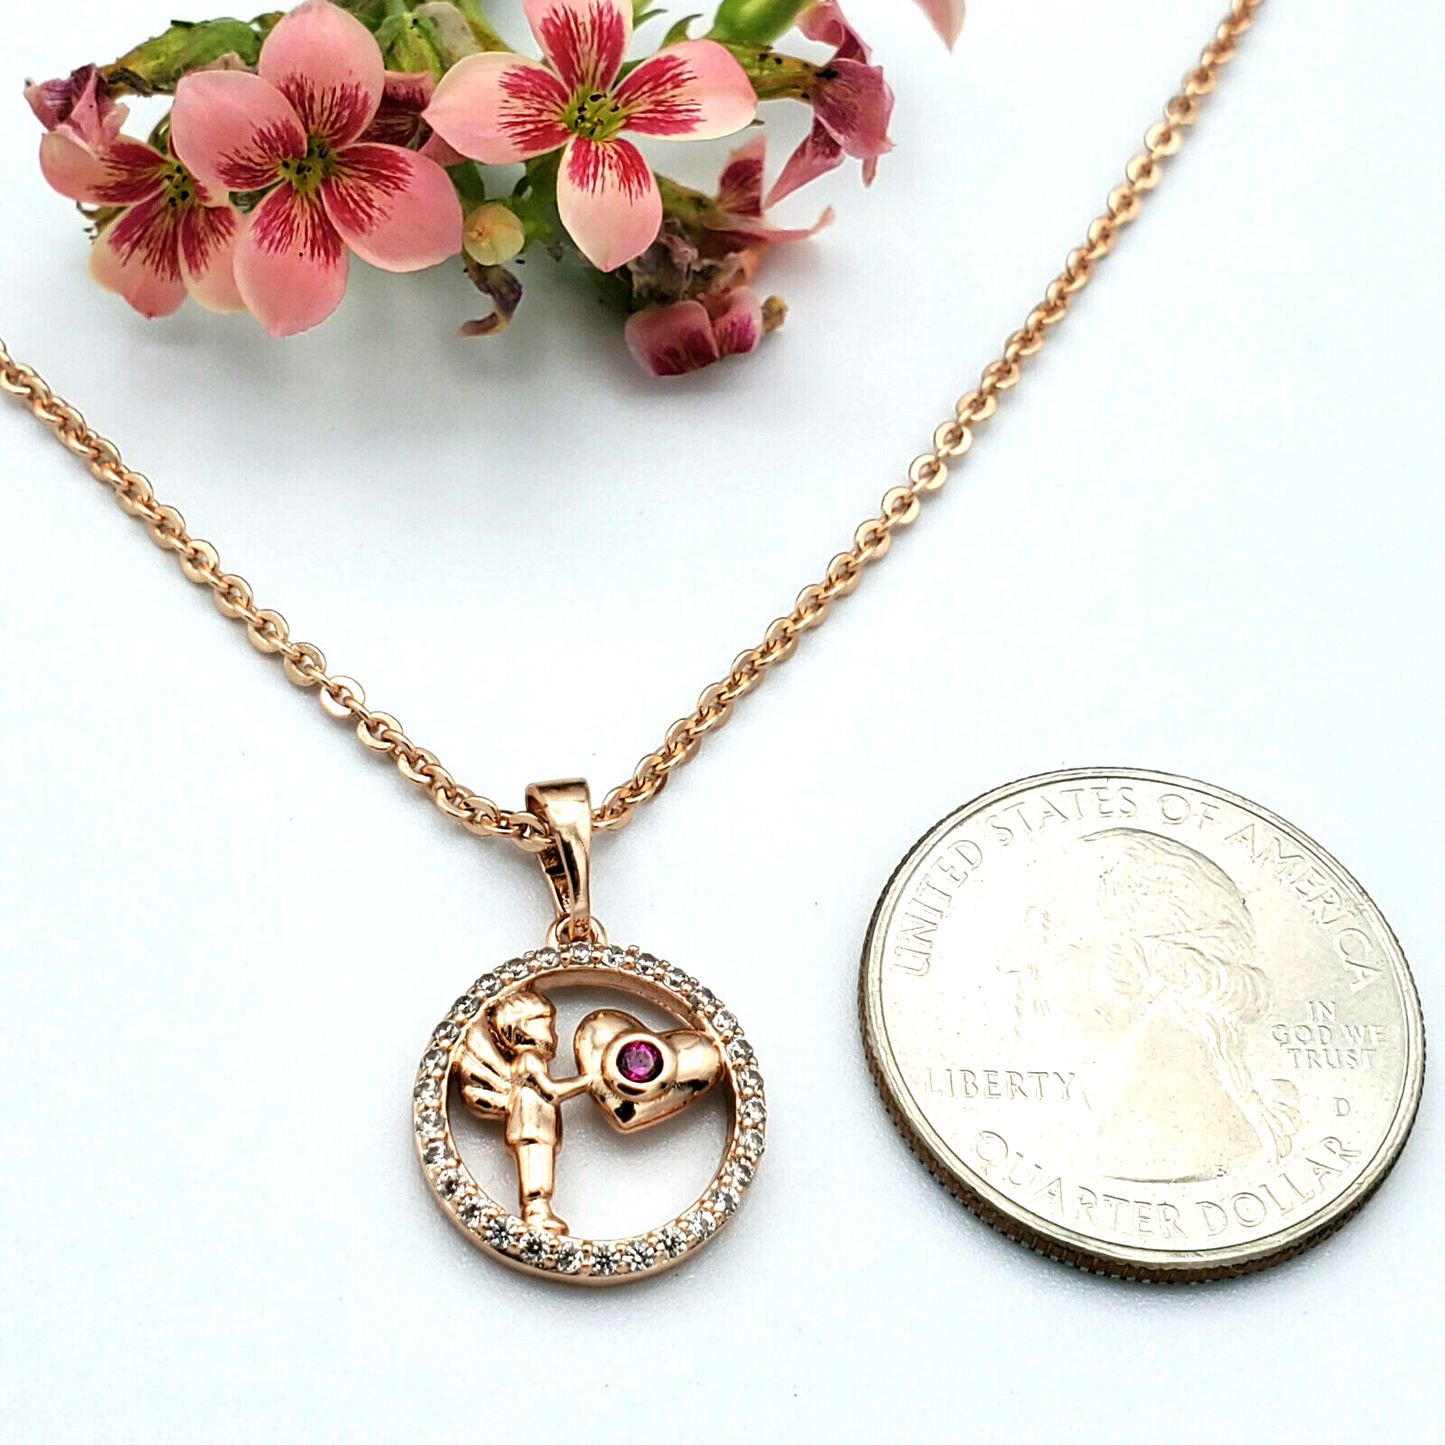 Necklaces - Rose Gold Plated. My Angel My Heart - Pendant & Chain.